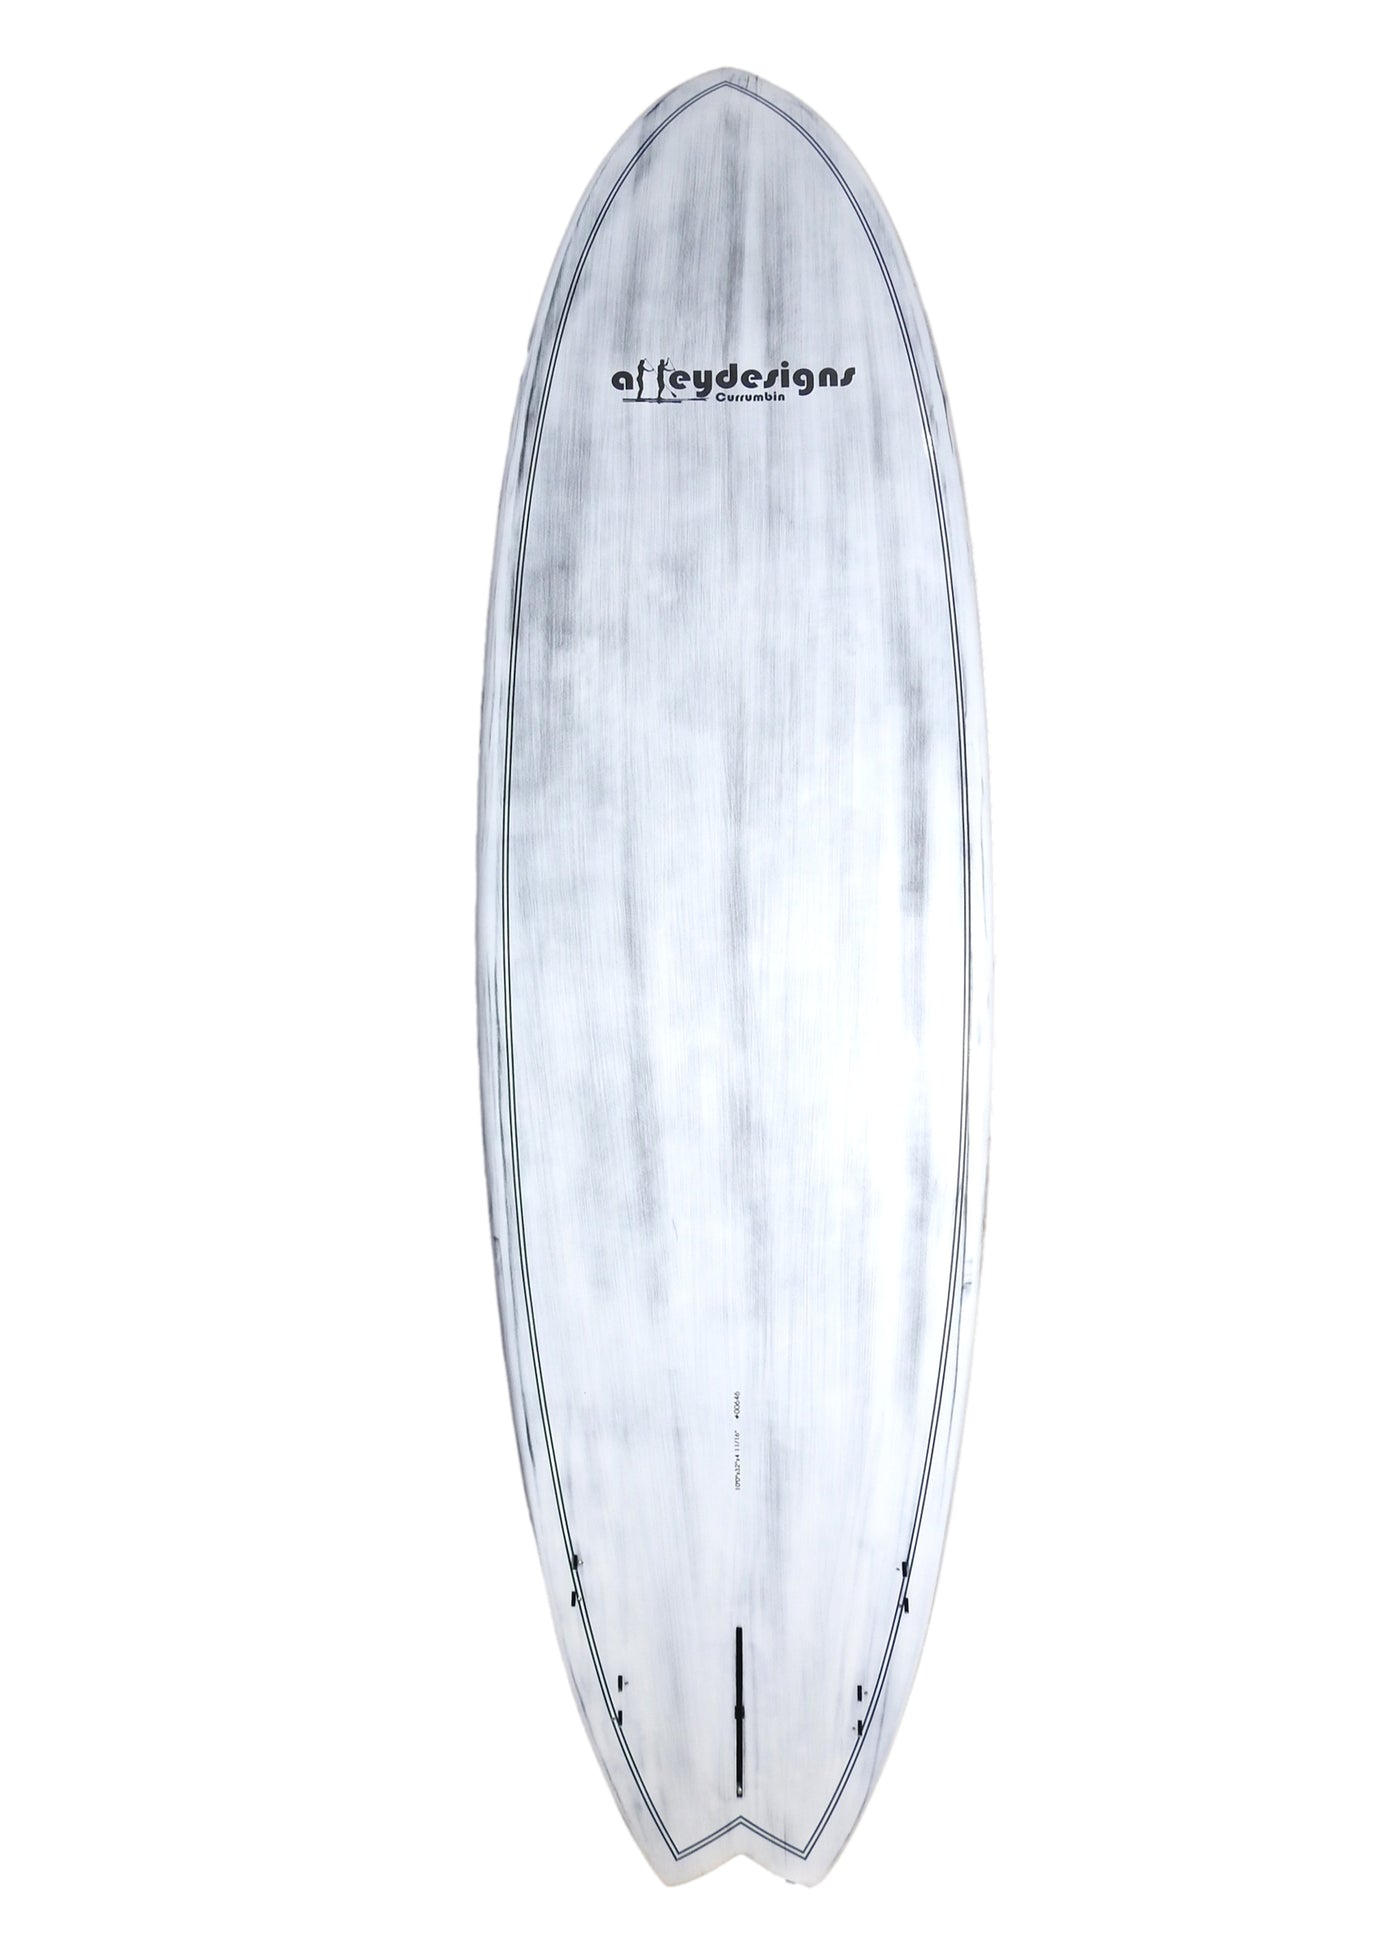 10' x 32"  Full Carbon White Performance Surf Alleydesigns SUP 10KG - Alleydesigns  Pty Ltd                                             ABN: 44165571264